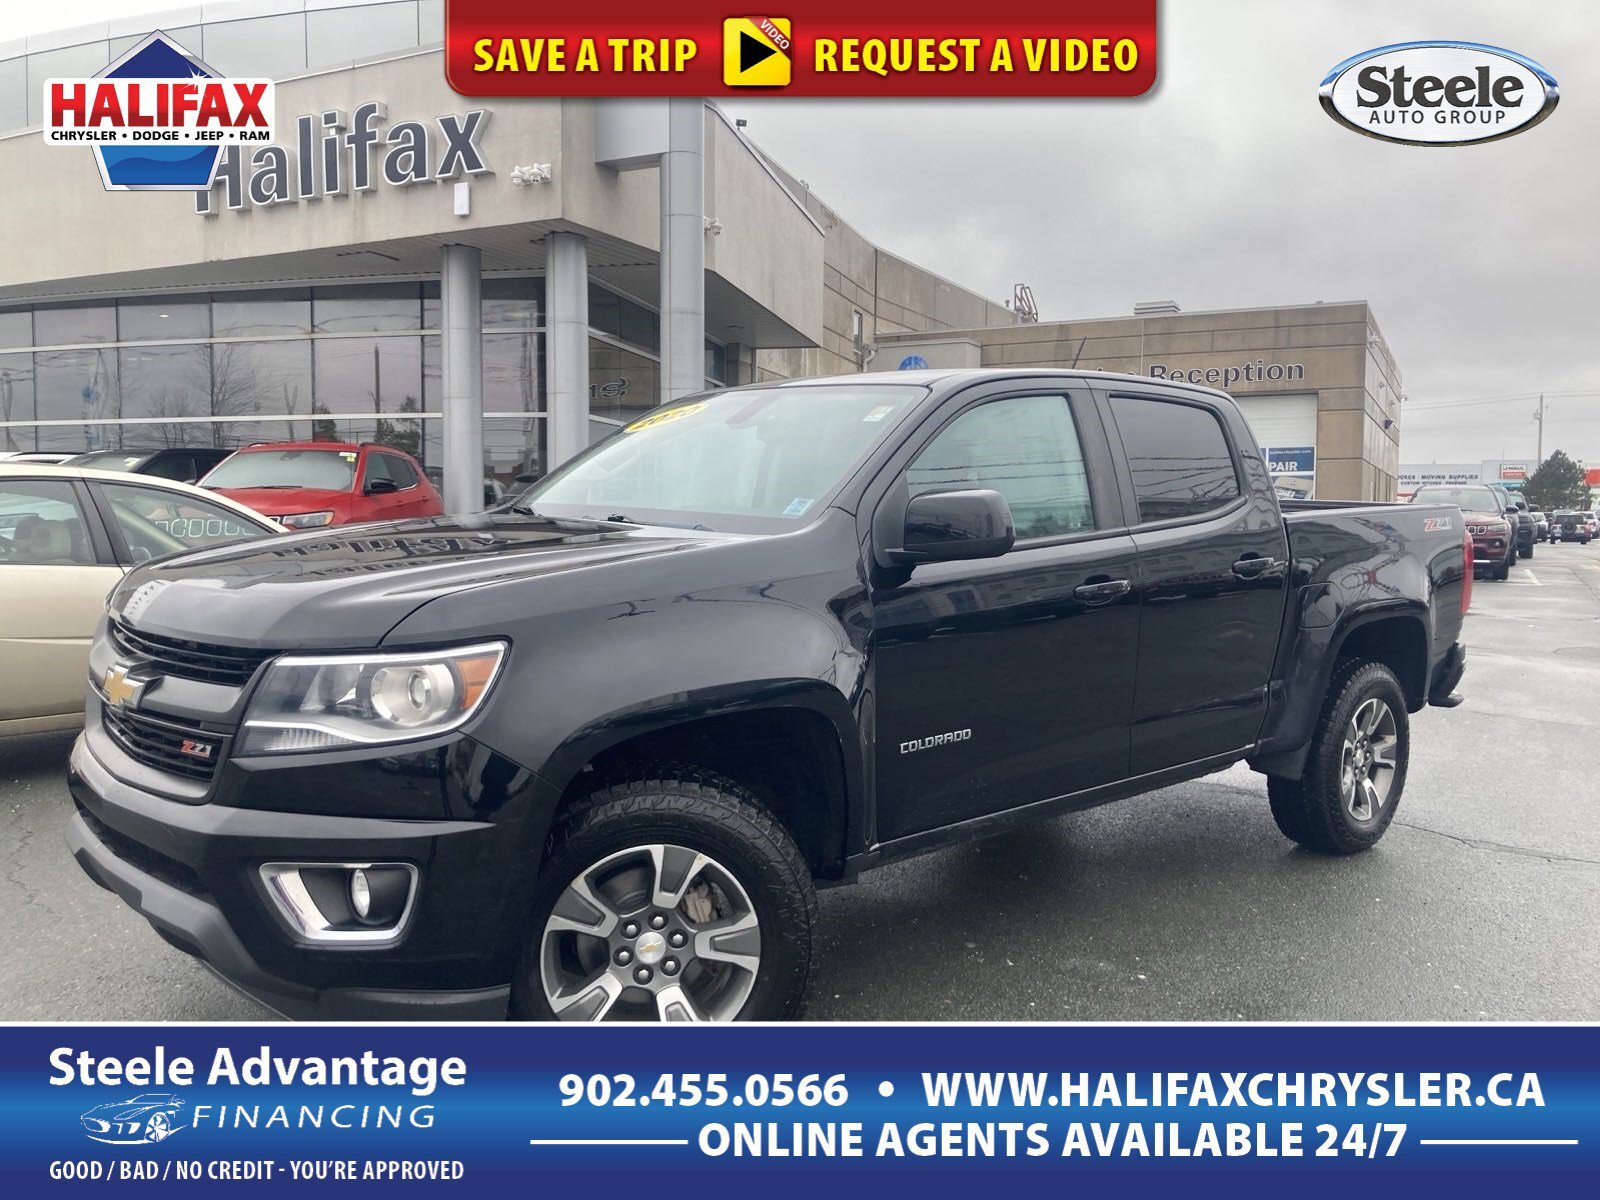 2020 Chevrolet Colorado 4WD Z71 - LOW KM, V6, HEATED LEATHER TRIMMED SEATS